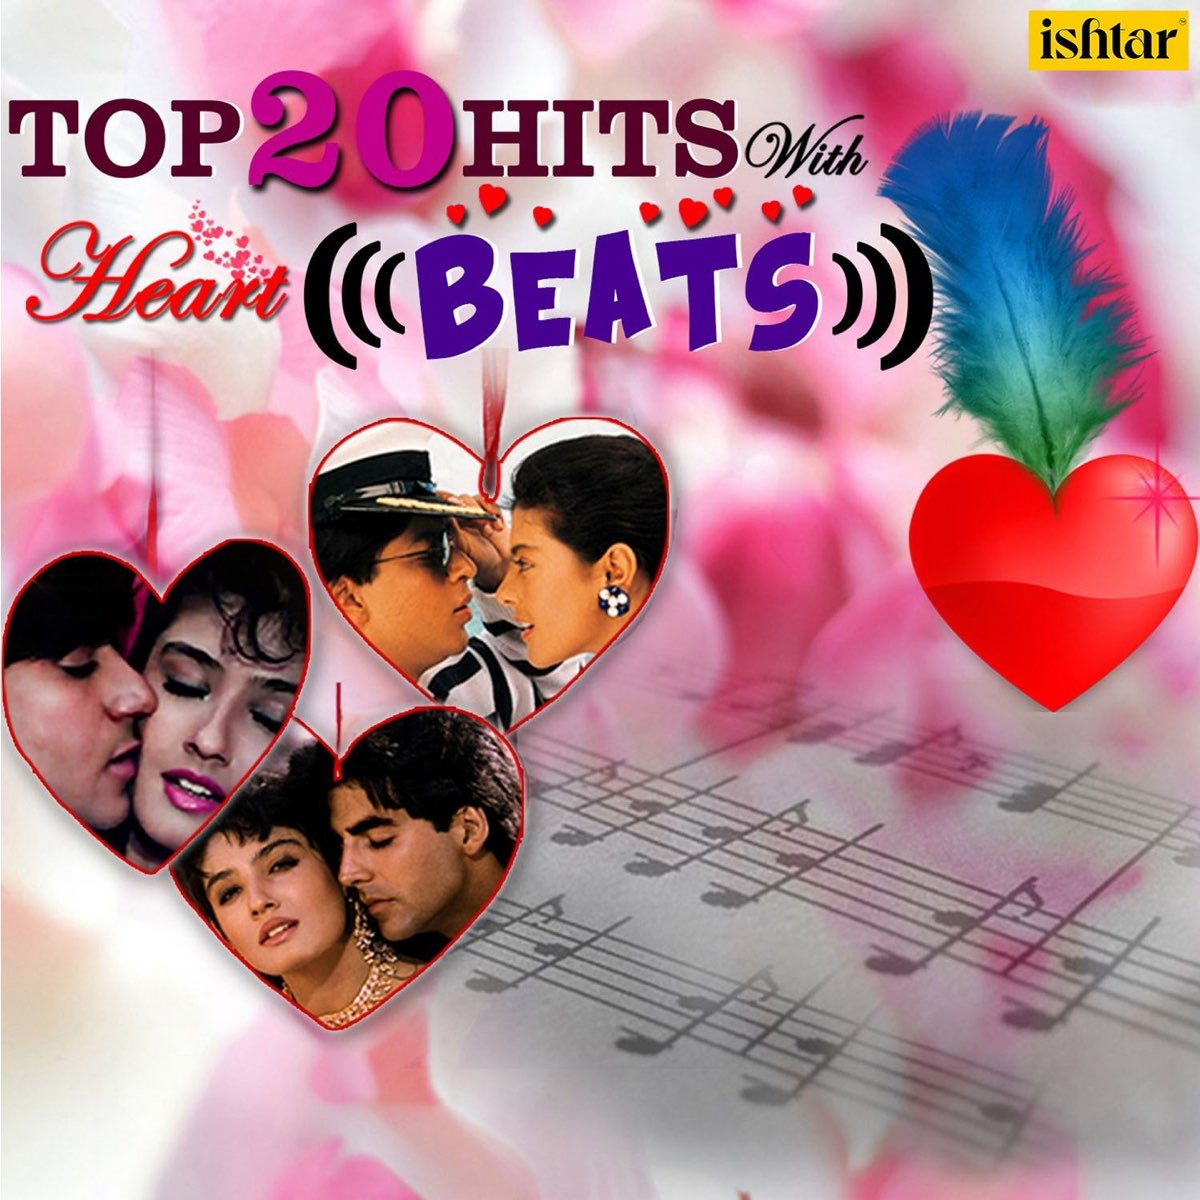 Top 20 Hits (With Heart Beats) by Various Artists on Apple Music